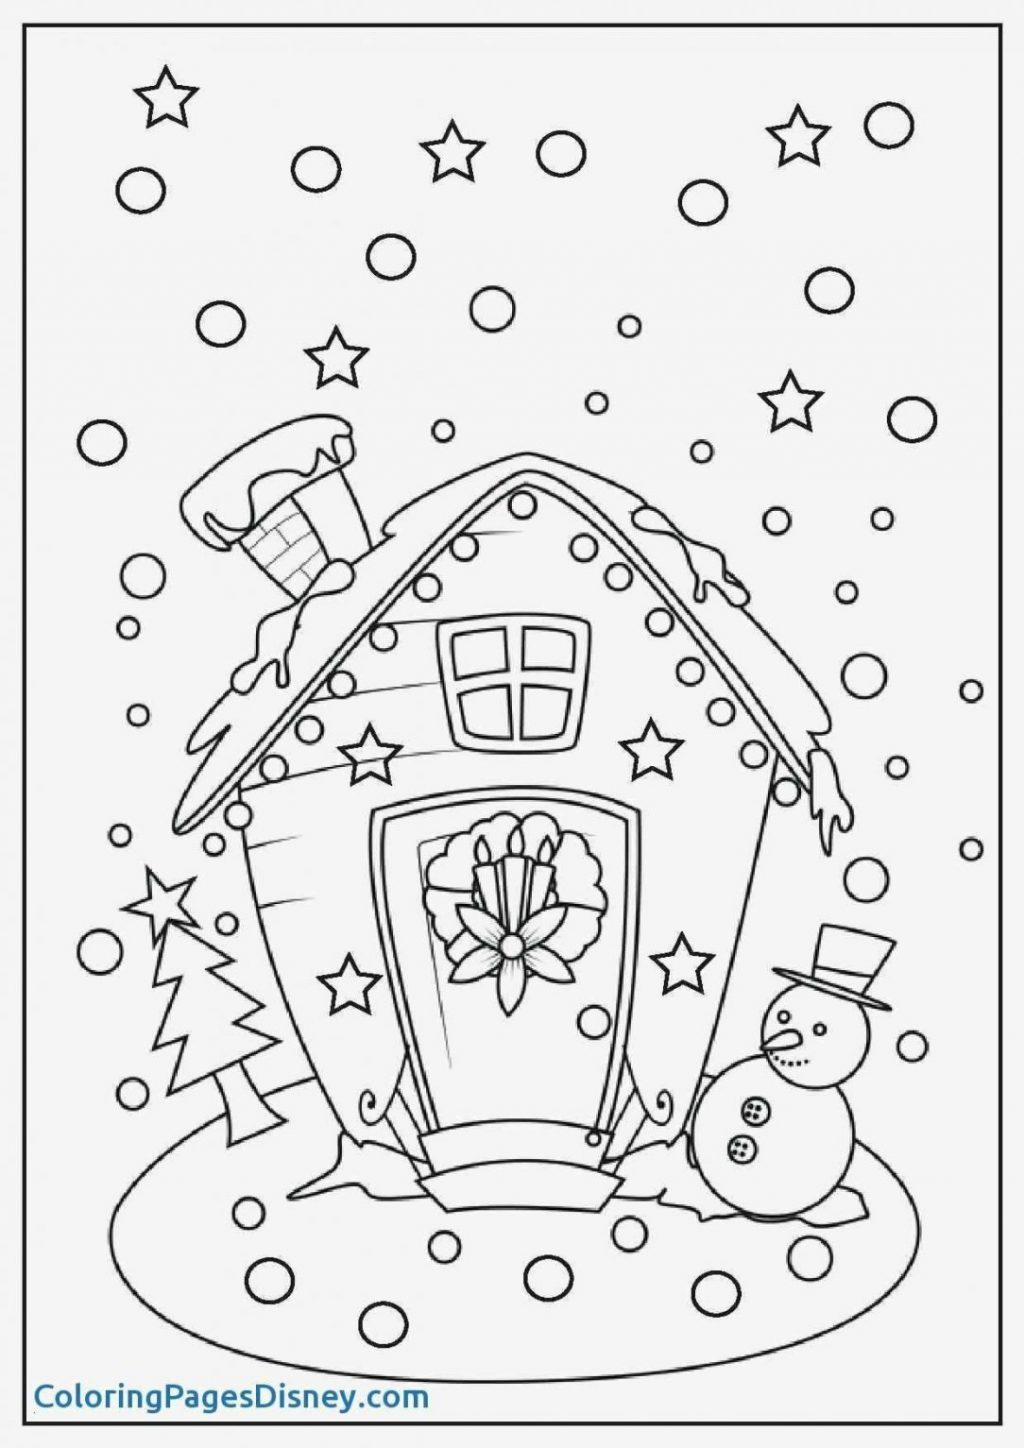 Colors Coloring Pages Coloring Page Disney Characters To Color Coloring Page Printable